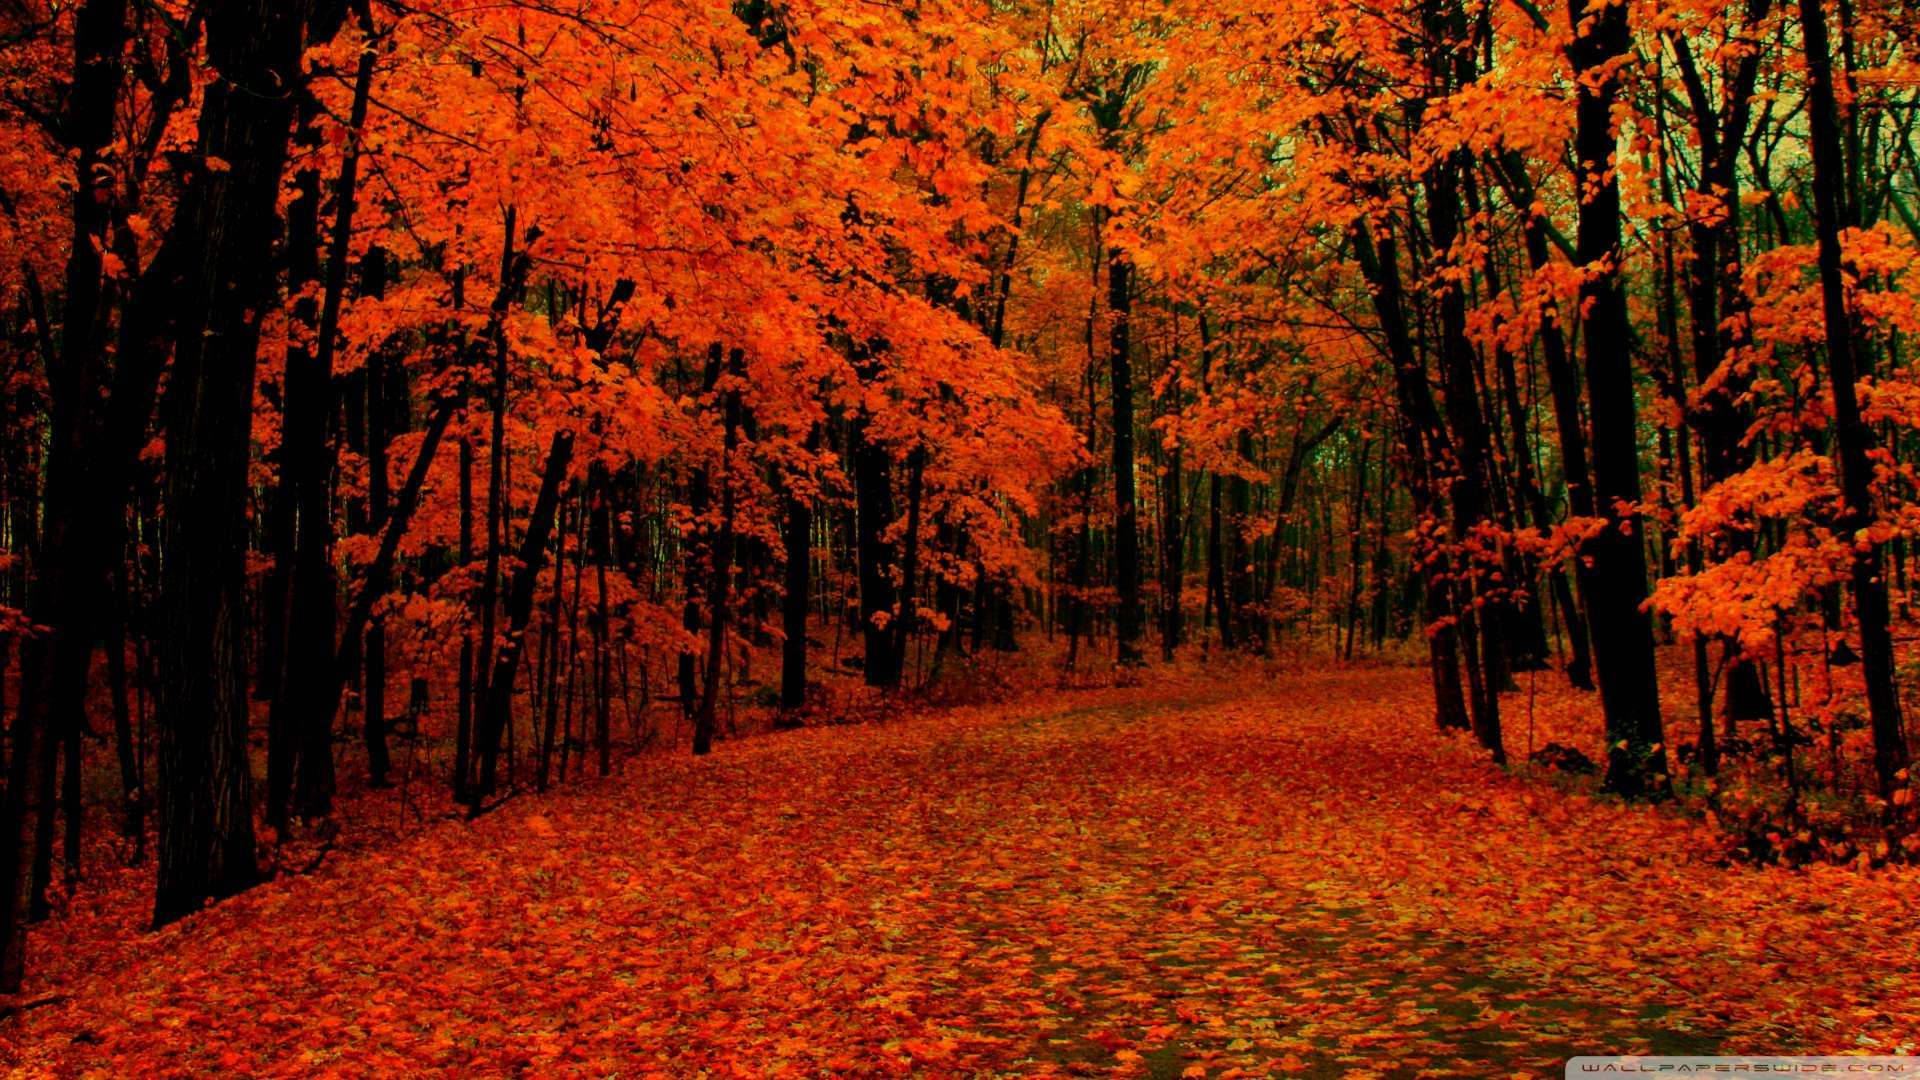 "A delicate walk amongst a vivid red autumn forest" Wallpaper